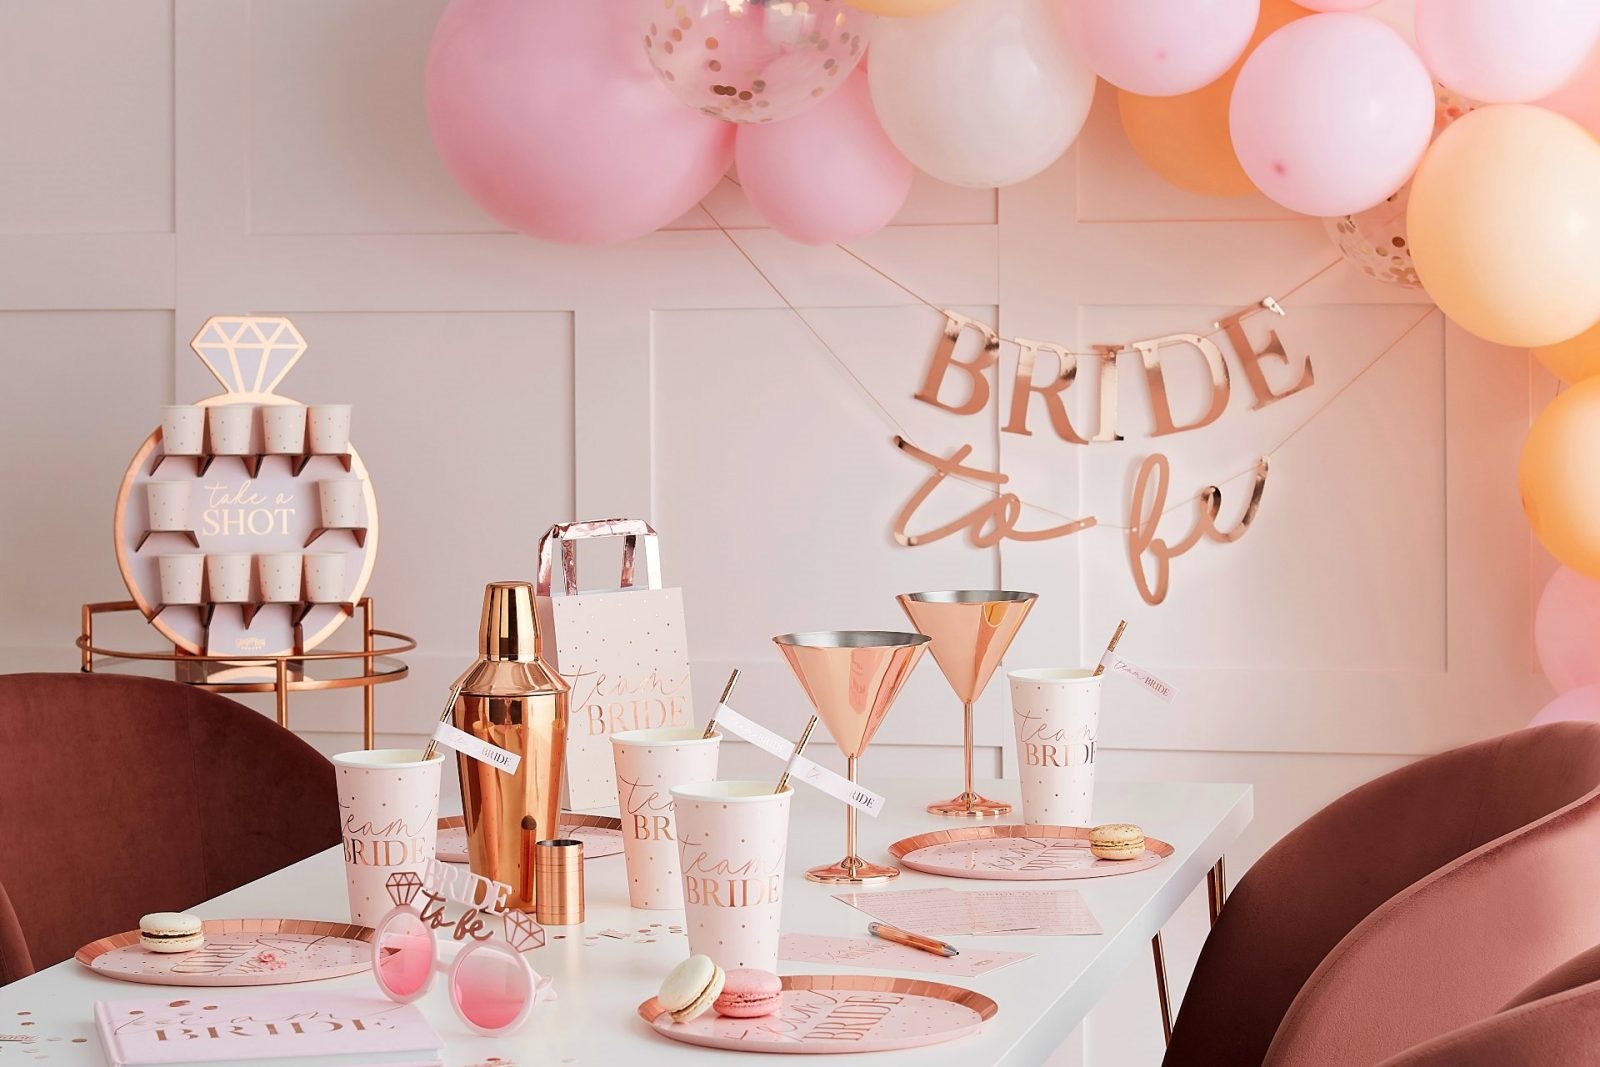 How To Make A Successful Hen Party?